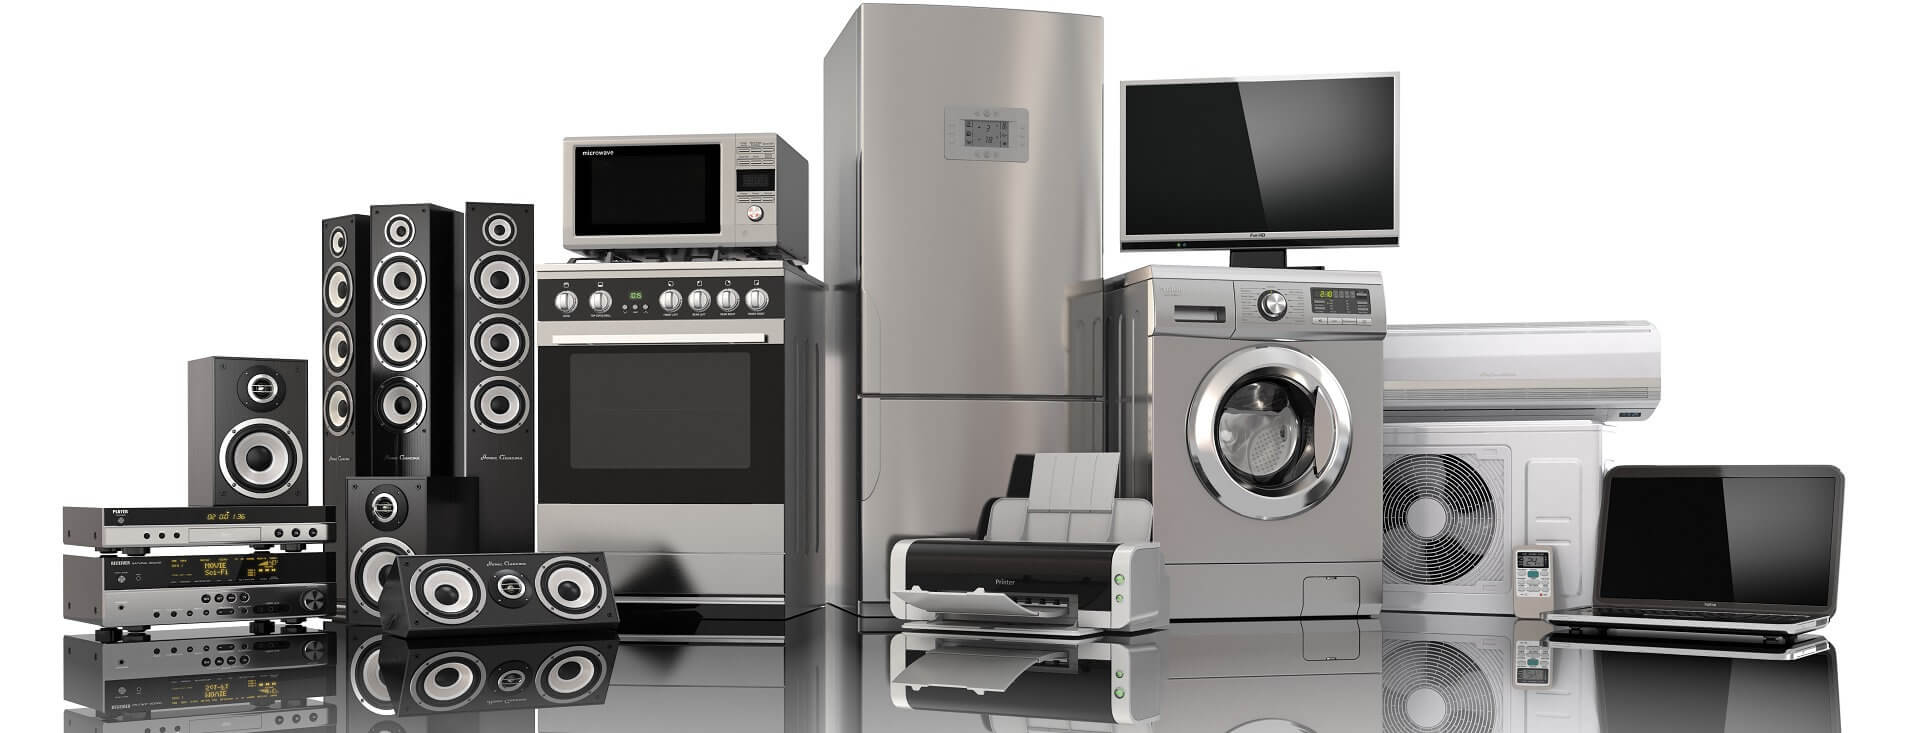 Drive Against Smuggled Home Appliance Intensifies